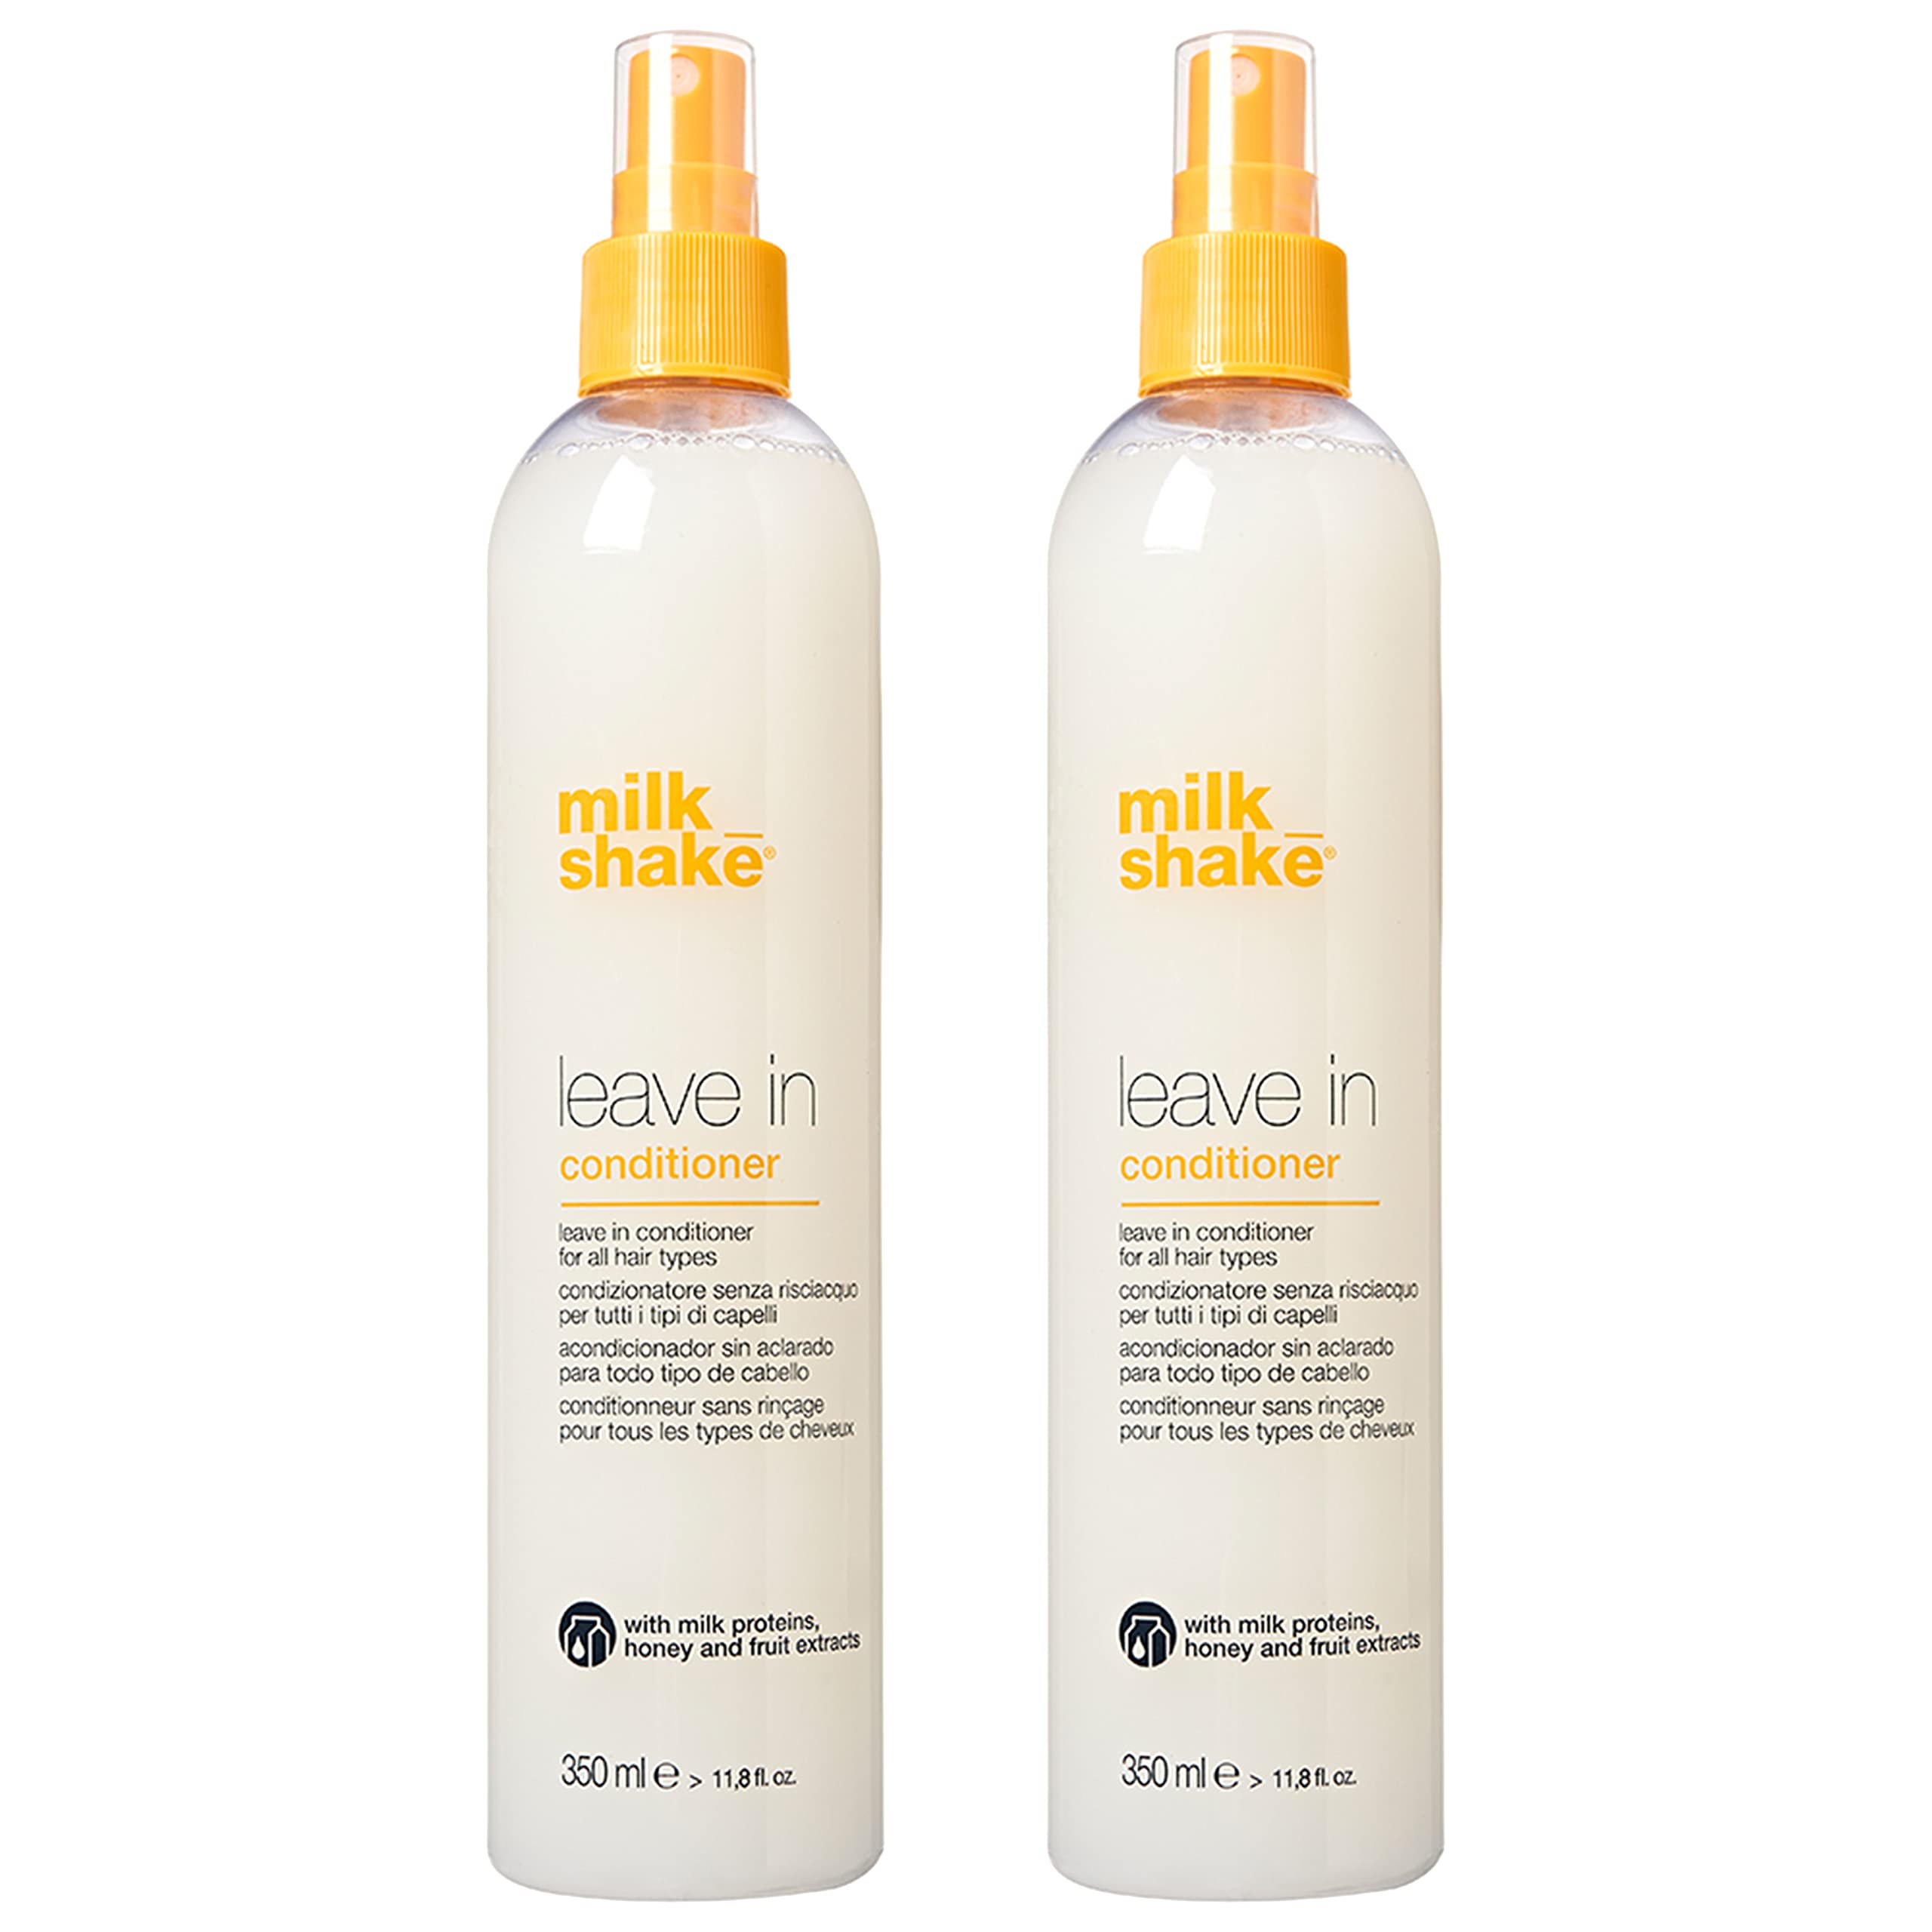 milk_shake Leave-In Conditioner Detangler Spray for Natural, Curly or Straight Hair - Protects and Hydrates Color Treated and Dry Hair, 11.8 Fl Oz (Pack of 2)